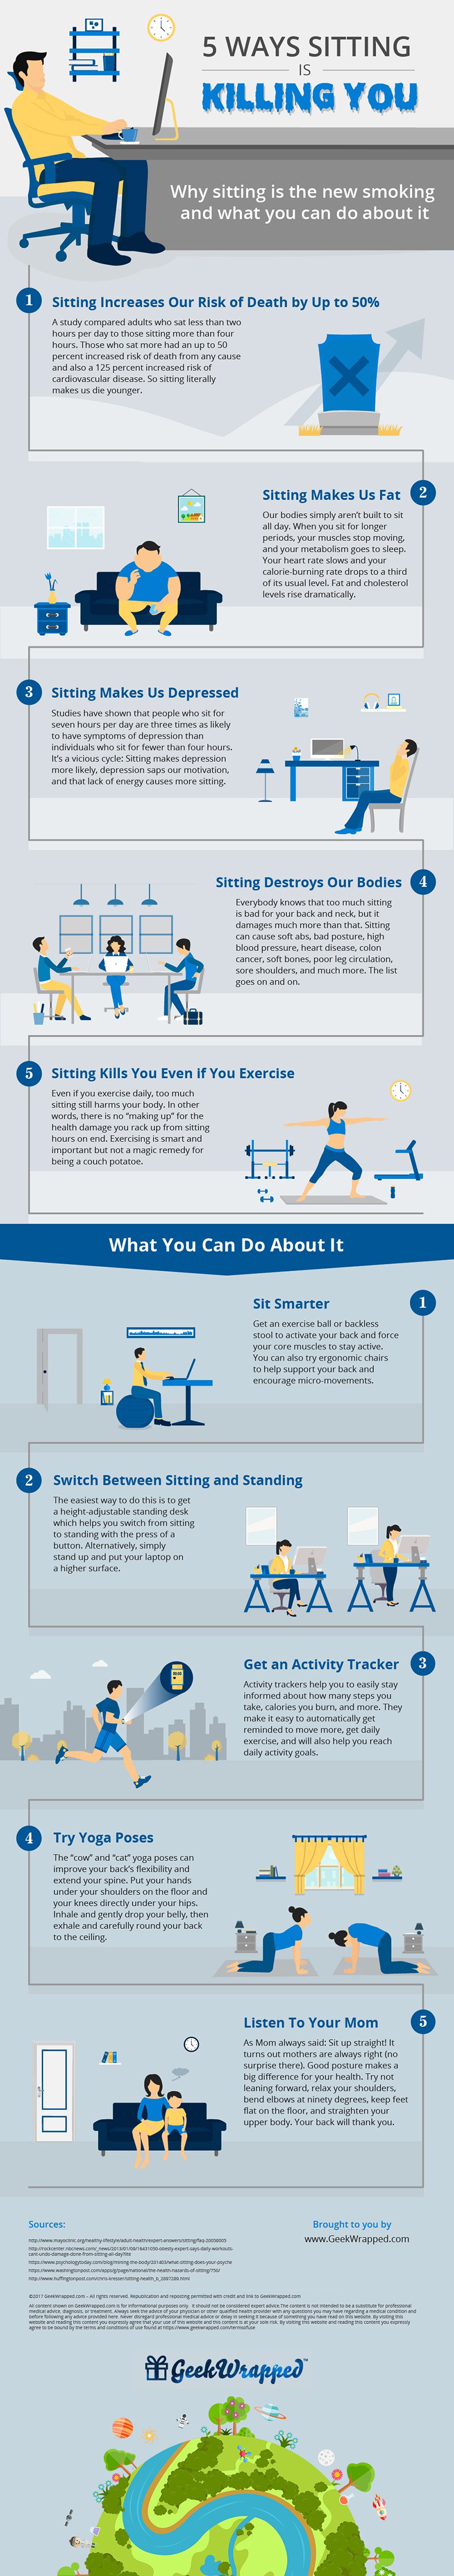 5-Ways-Sitting-is-Killing-You-infographic